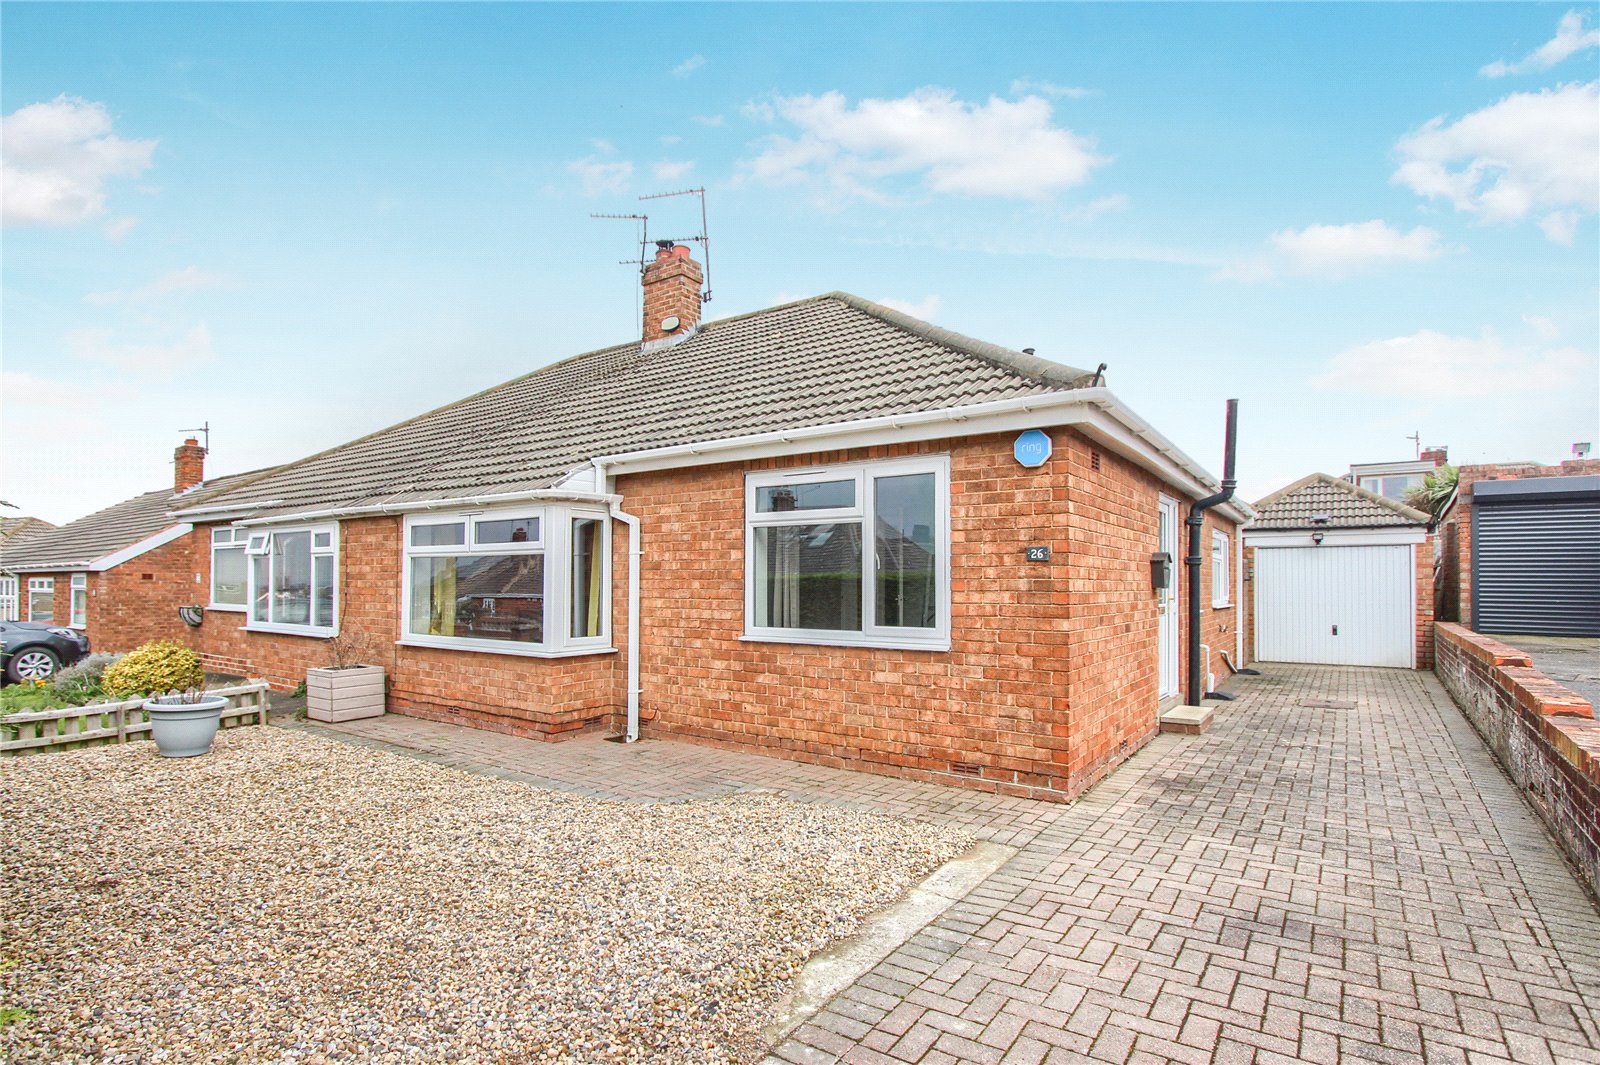 2 bed bungalow for sale in Highfield Road, Eston - Property Image 1